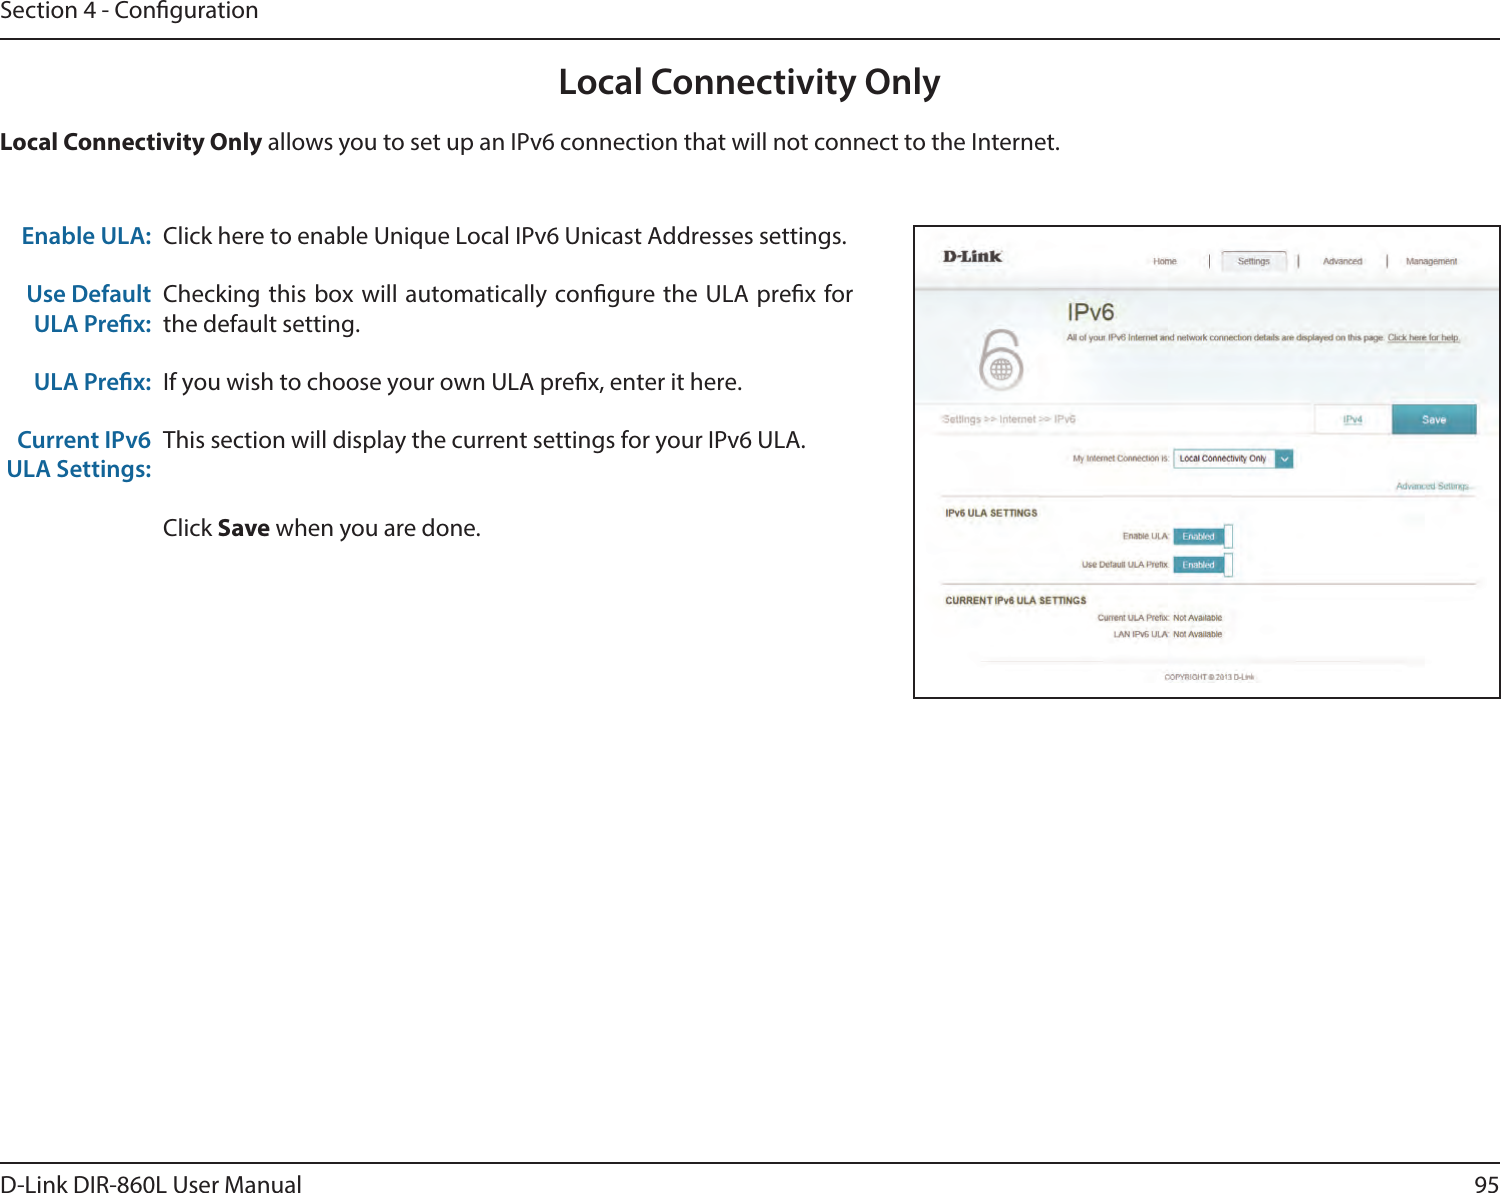 95D-Link DIR-860L User ManualSection 4 - CongurationLocal Connectivity OnlyClick here to enable Unique Local IPv6 Unicast Addresses settings.Checking this box will automatically congure the ULA prex for the default setting.If you wish to choose your own ULA prex, enter it here.This section will display the current settings for your IPv6 ULA.Click Save when you are done.Enable ULA:Use Default ULA Prex:ULA Prex:Current IPv6 ULA Settings:Local Connectivity Only allows you to set up an IPv6 connection that will not connect to the Internet.